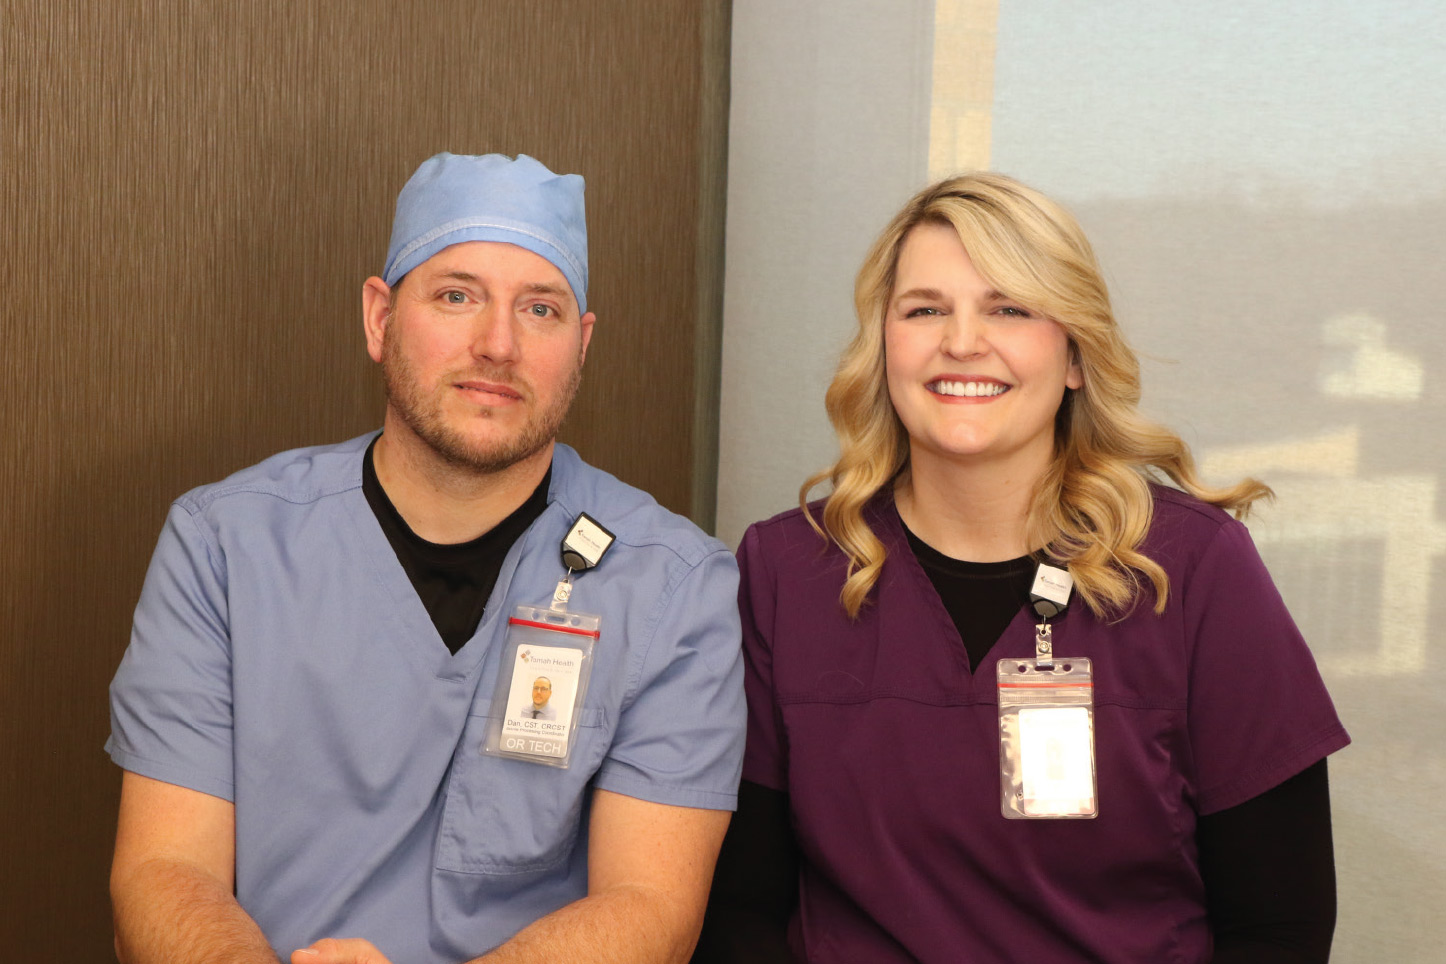 On left is Dan Cole, Sterile Processing Coordinator, and on right is his wife, Sarah Cole, Director of Pulmonary Services